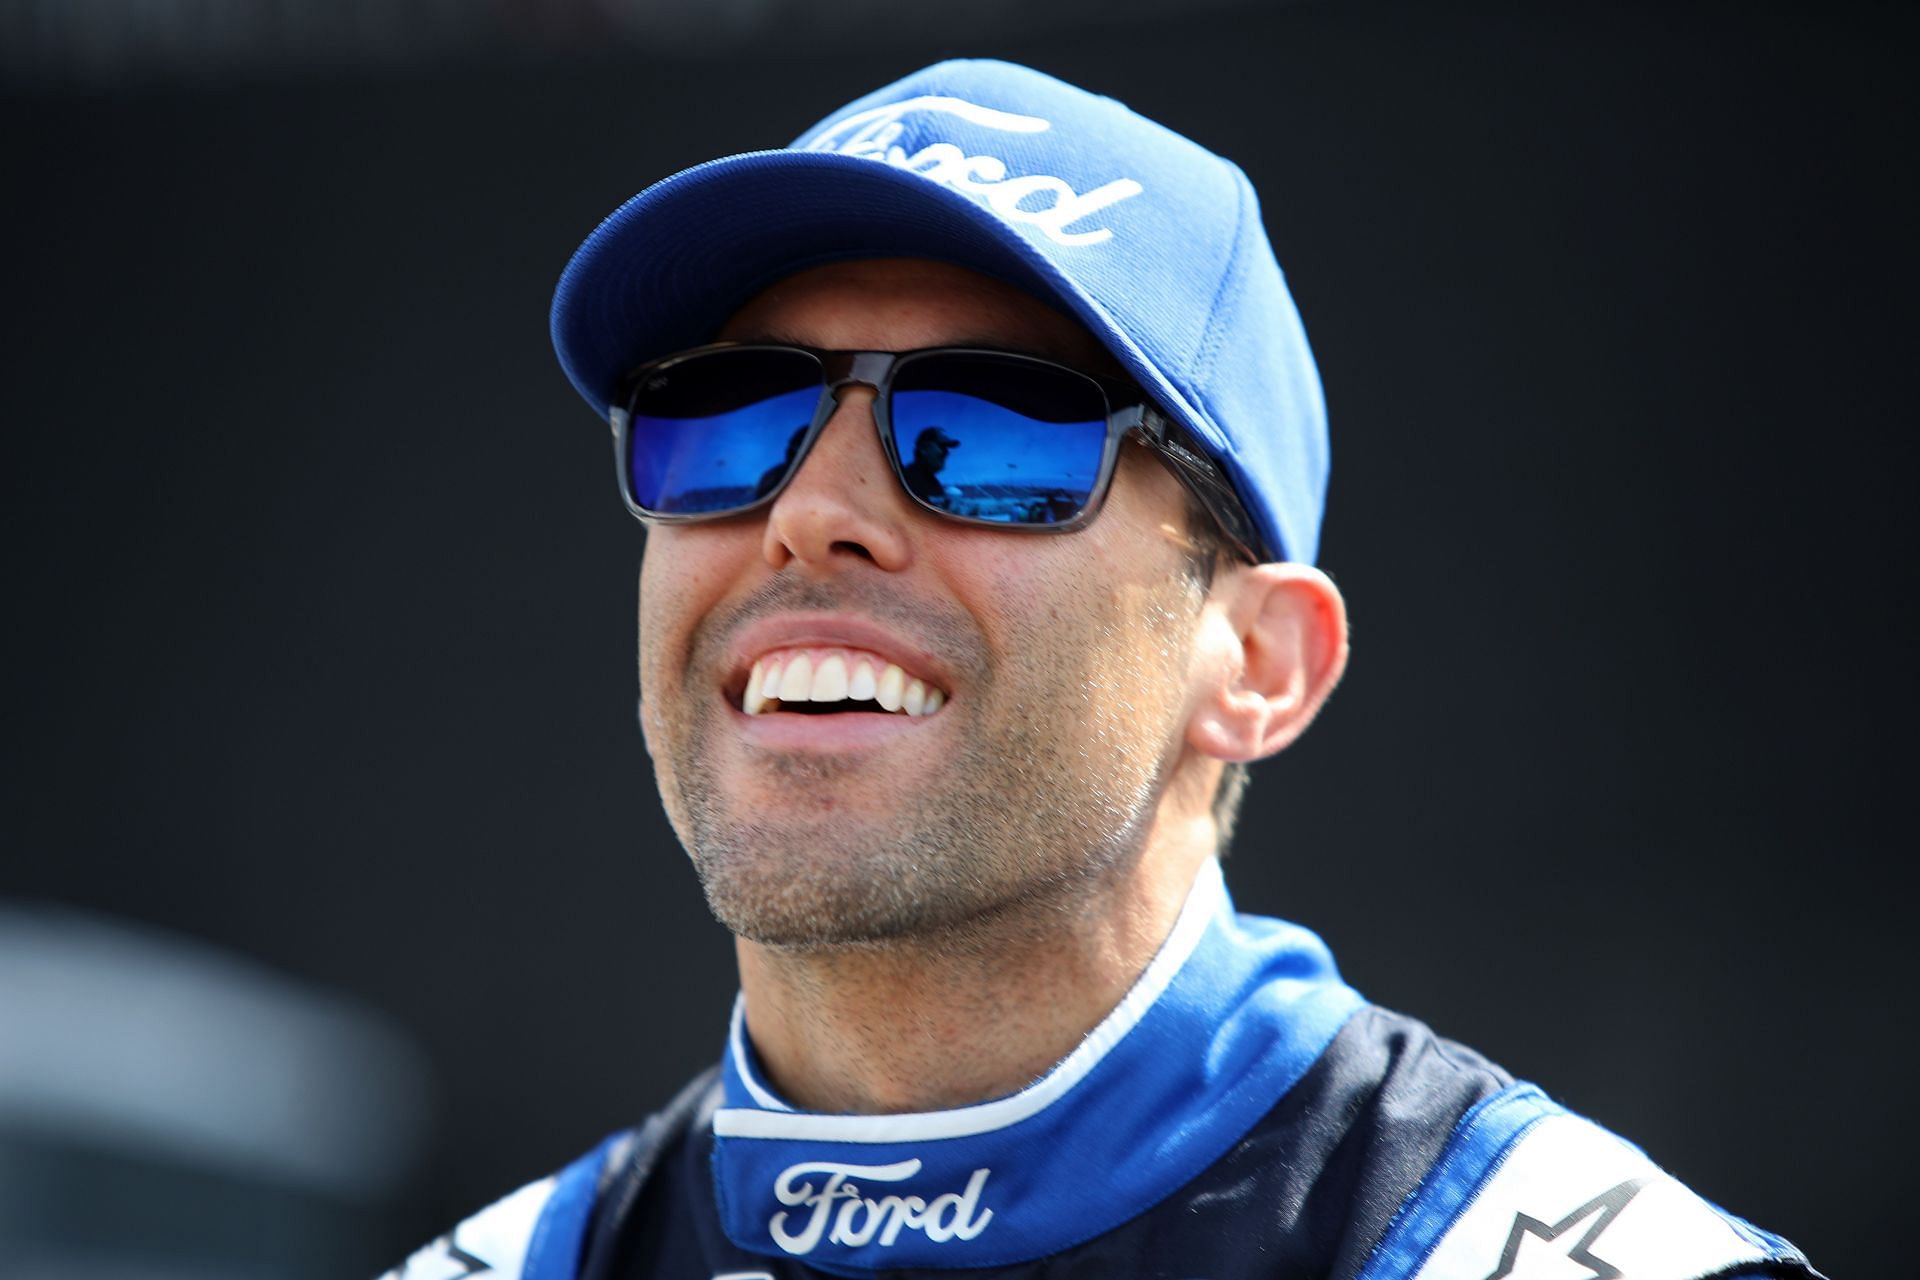 Aric Almirola looks on during qualifying for the NASCAR Cup Series Enjoy Illinois 300 at WWT Raceway